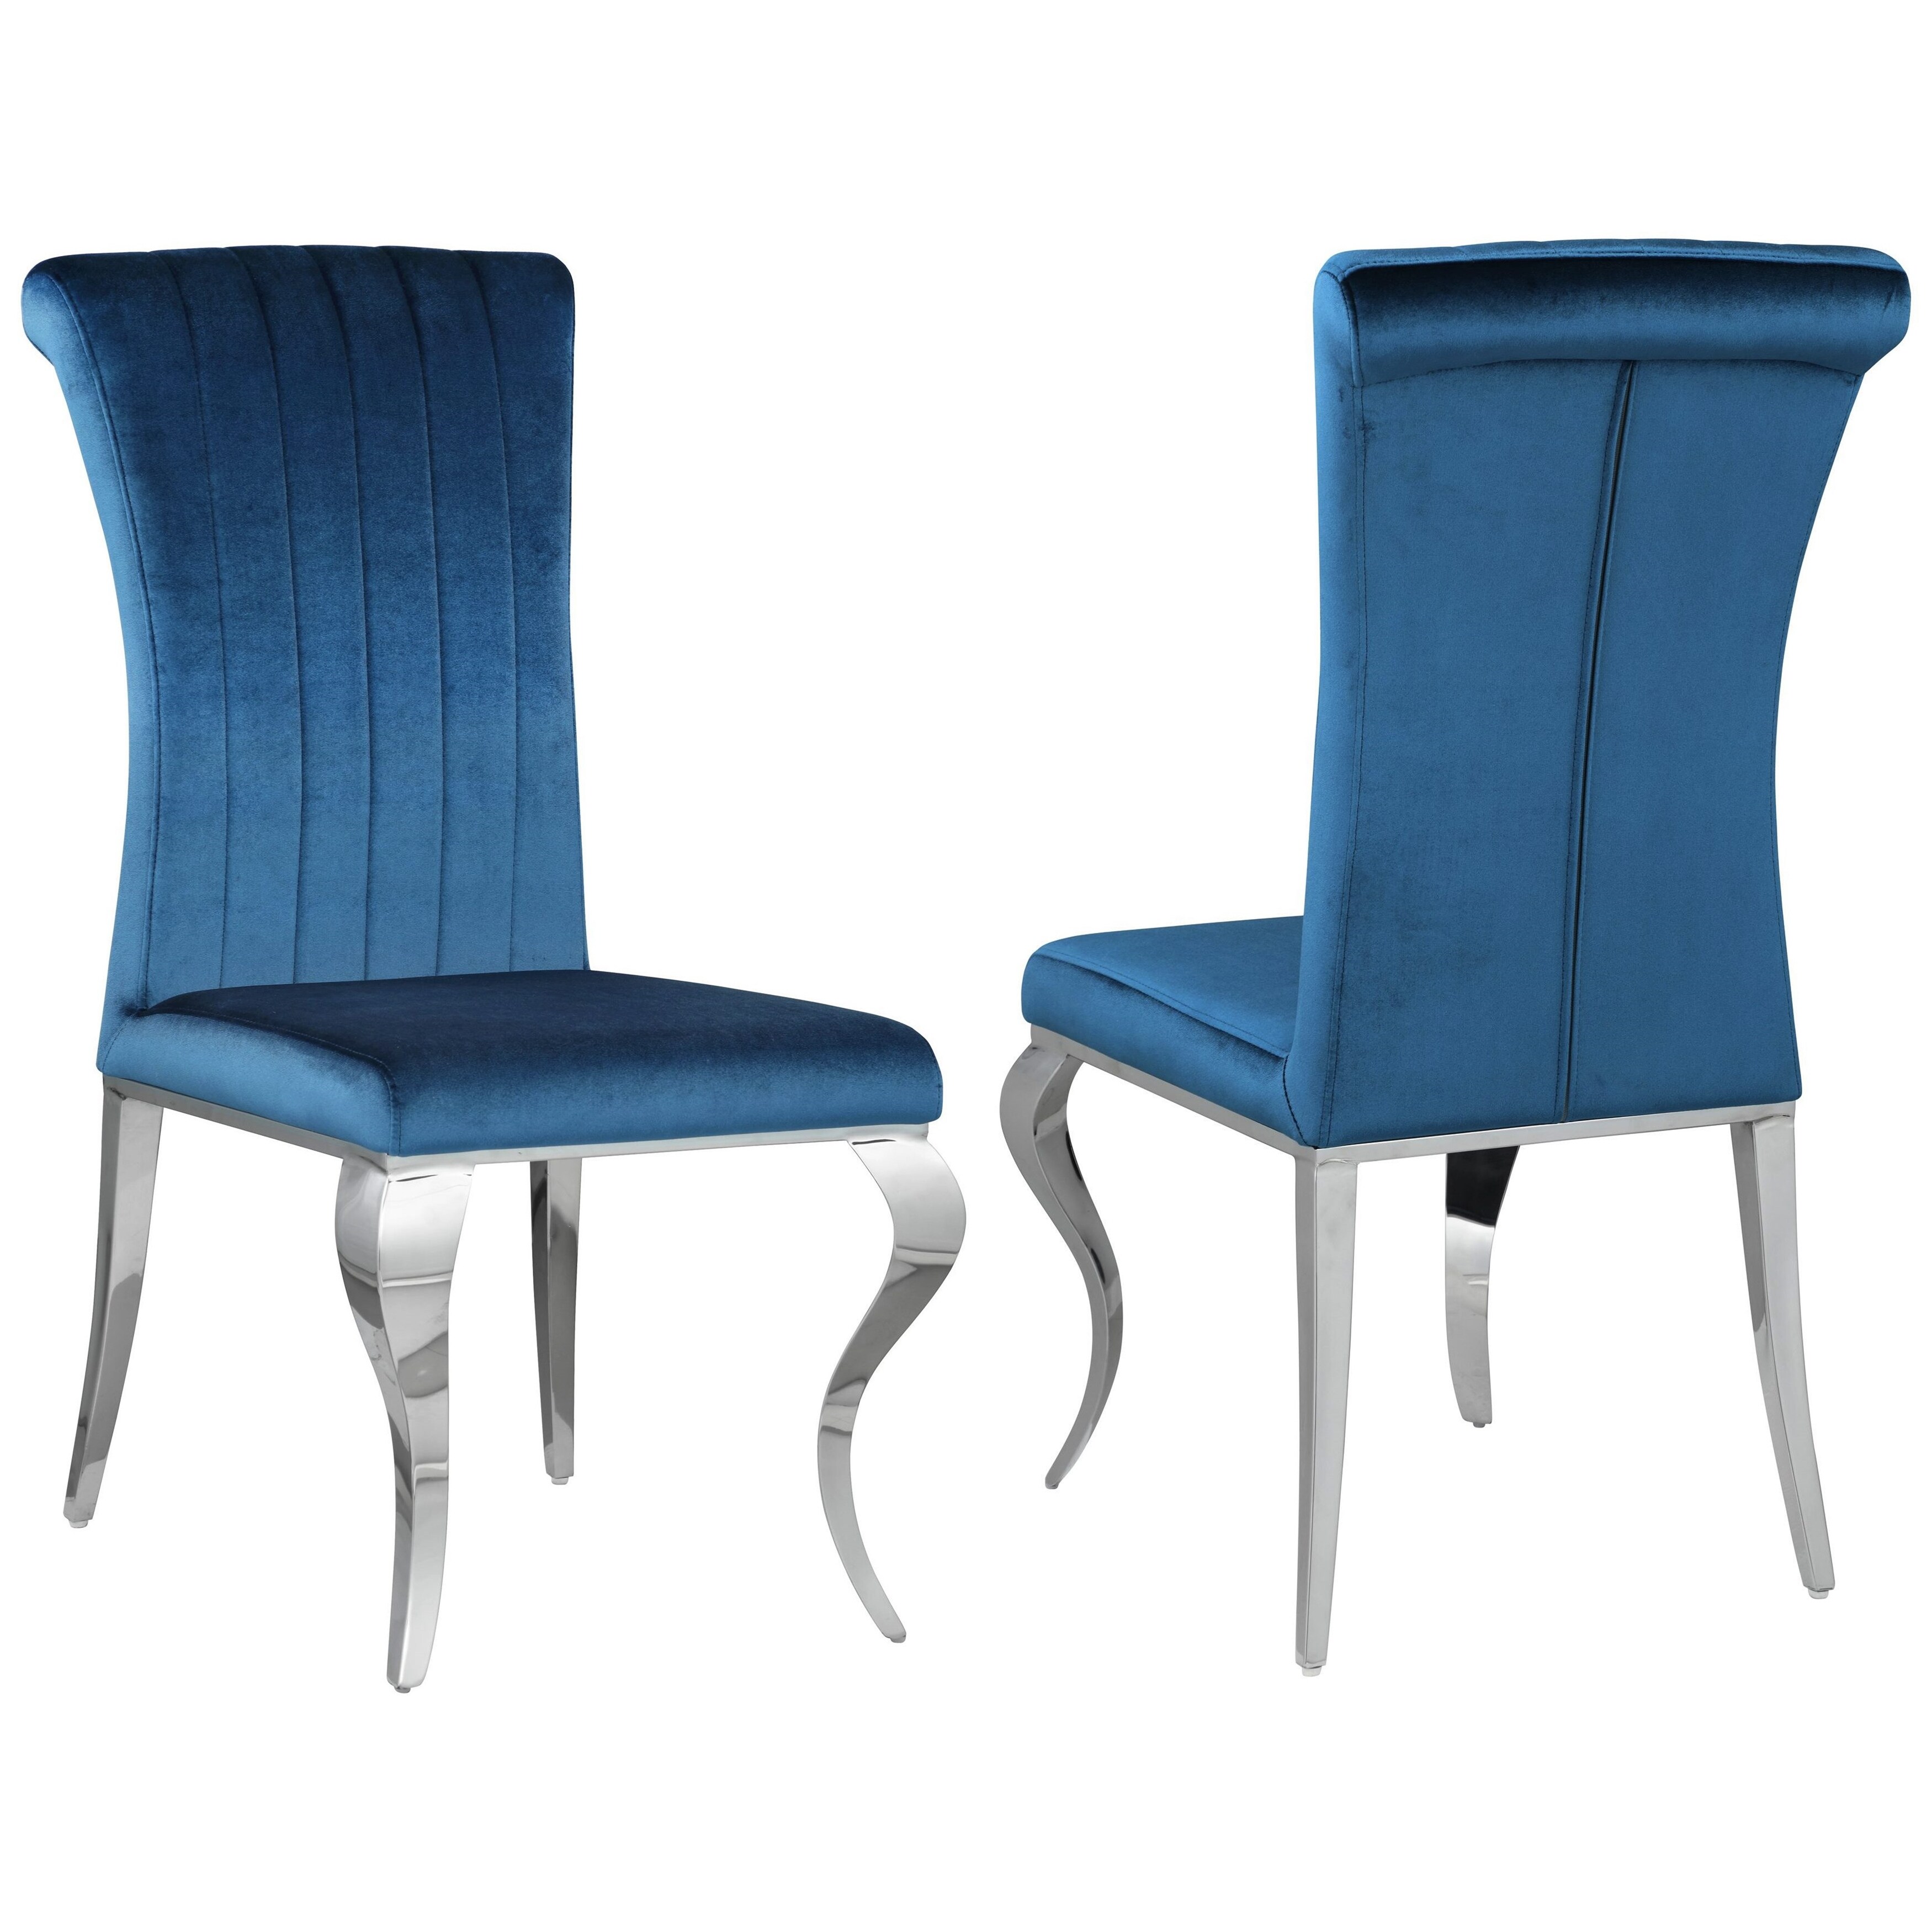 Majestic Cabriola Design Teal Velvet Dining Chairs with Chrome legs (Set of 4)